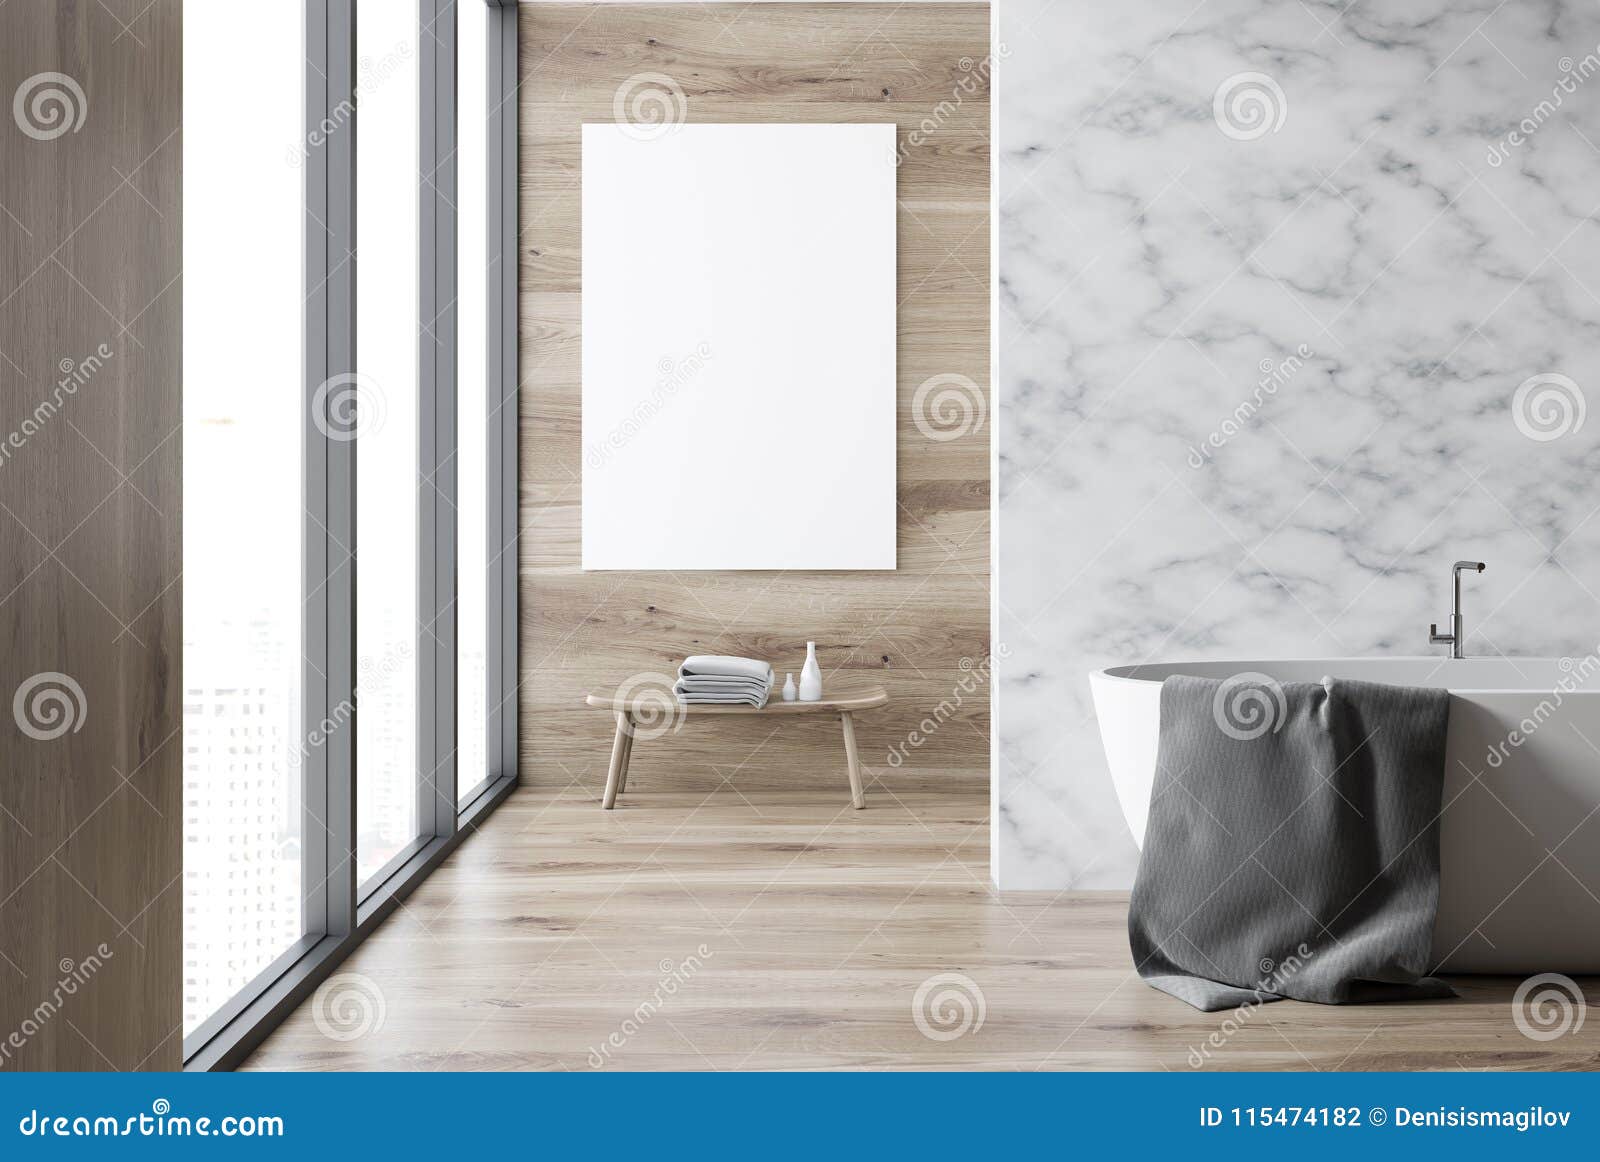 Wooden And Marble Bathroom Interior Stock Illustration